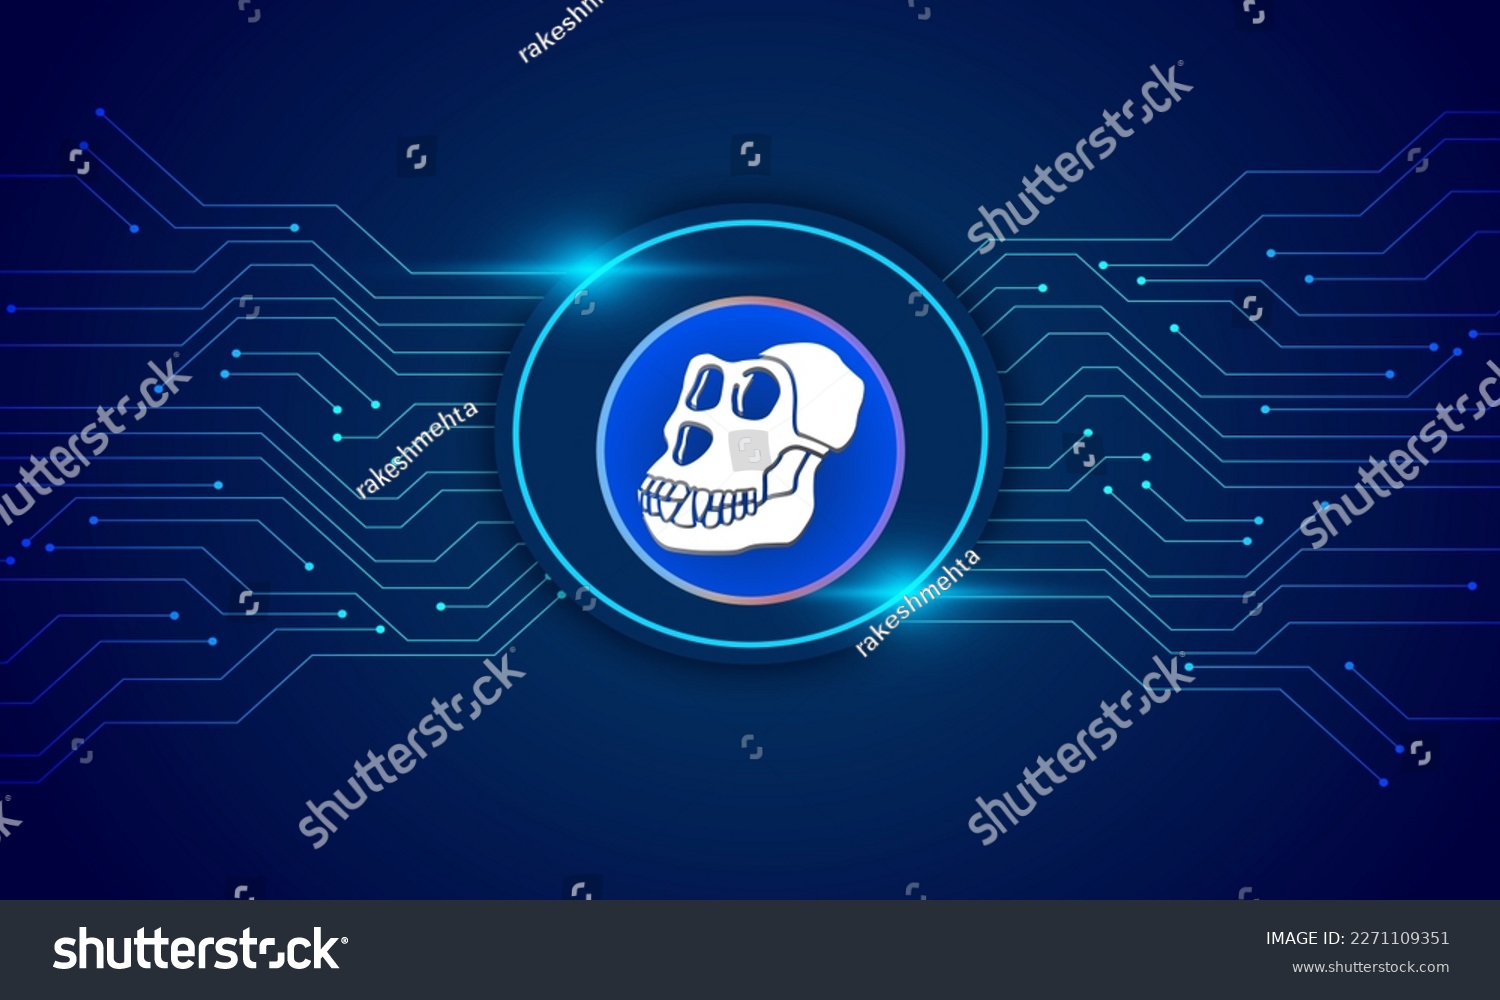 SVG of Ape Coin Token   logo with crypto currency themed circle background design. Ape Coin (APE) Token  currency vector illustration blockchain technology concept  svg